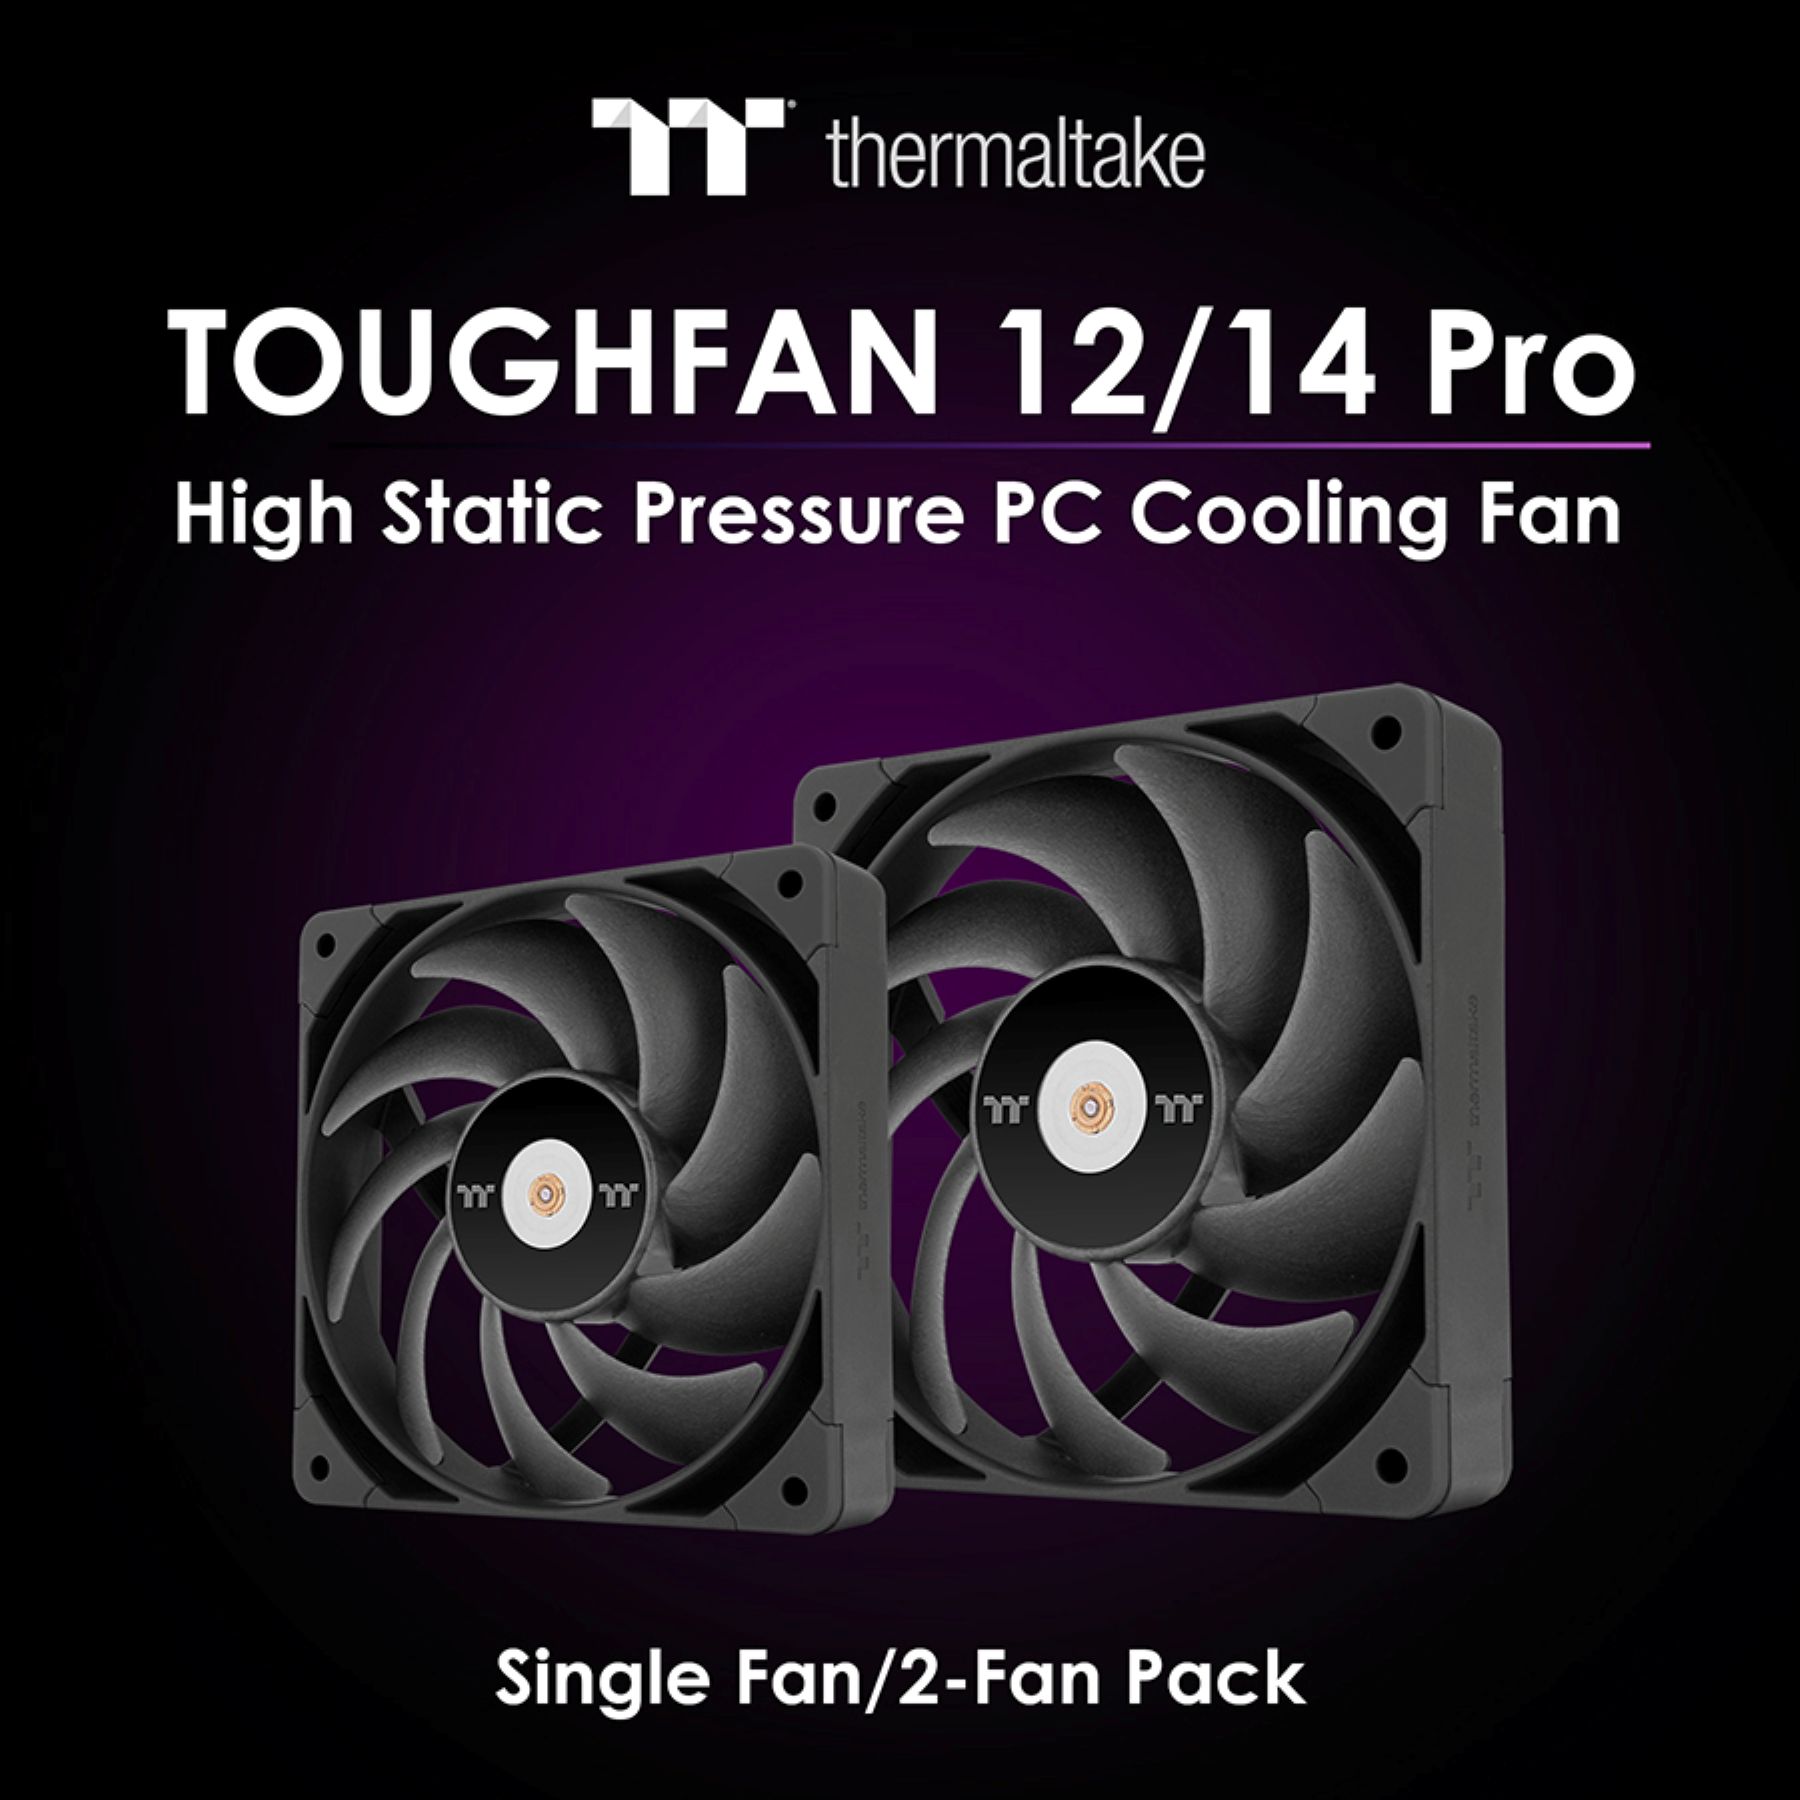 Thermaltake Introduces the New TOUGHFAN 12/14 ProPC Cooling Fan